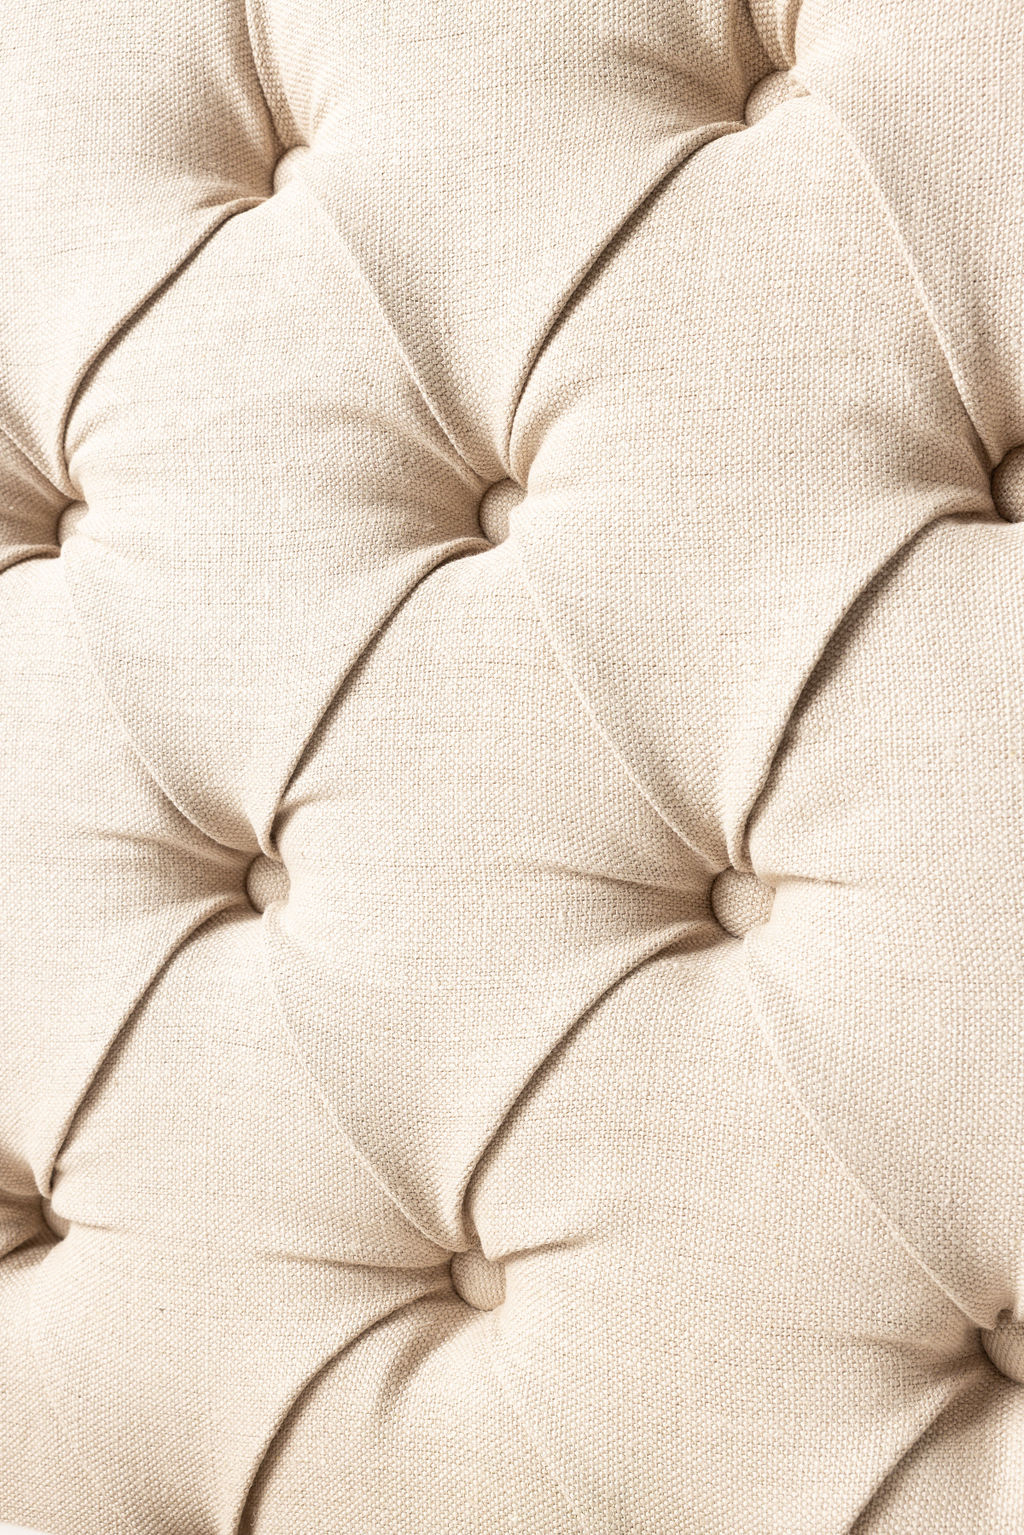 Francis classic white tufted linen headboard